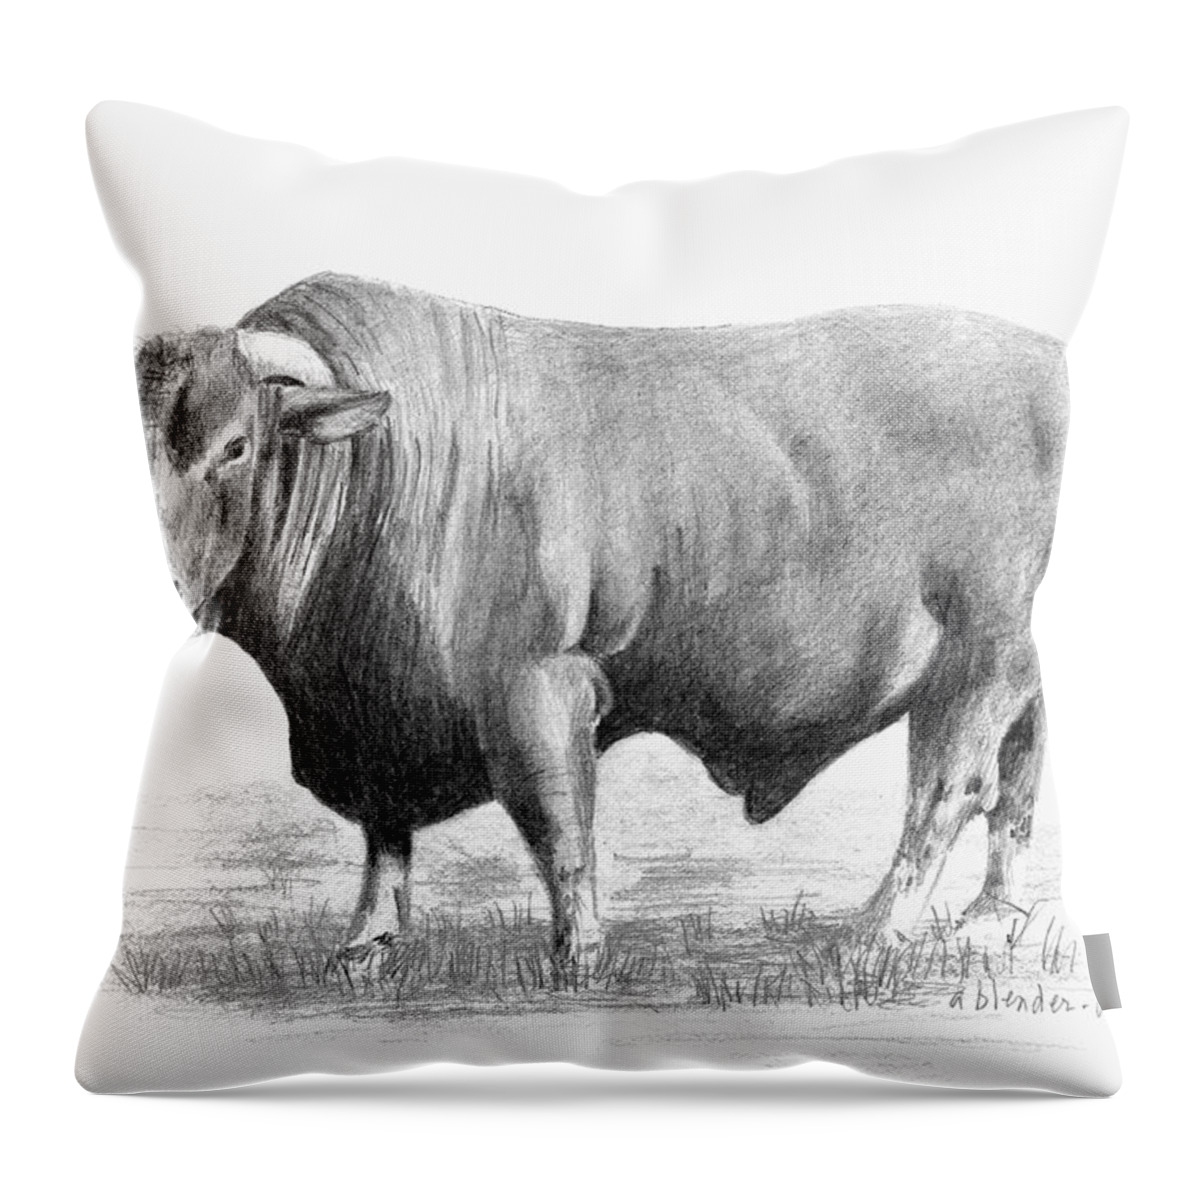  Bull Throw Pillow featuring the drawing Santa Gertrudis Bull by Arline Wagner